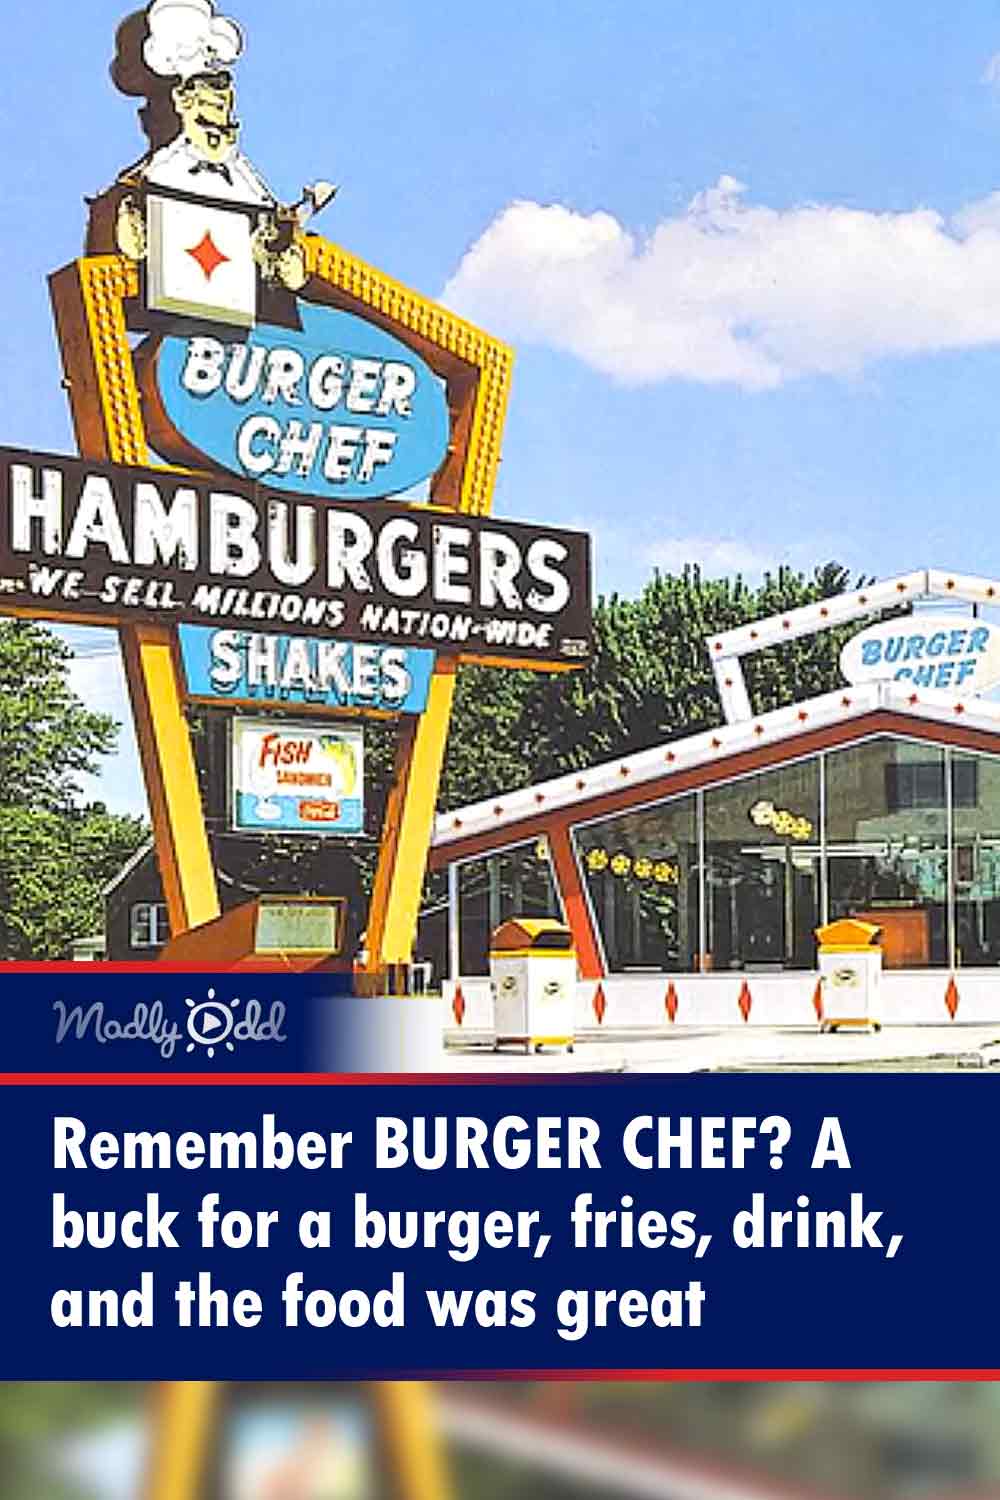 Remember BURGER CHEF? A buck for a burger, fries, drink, and the food was great